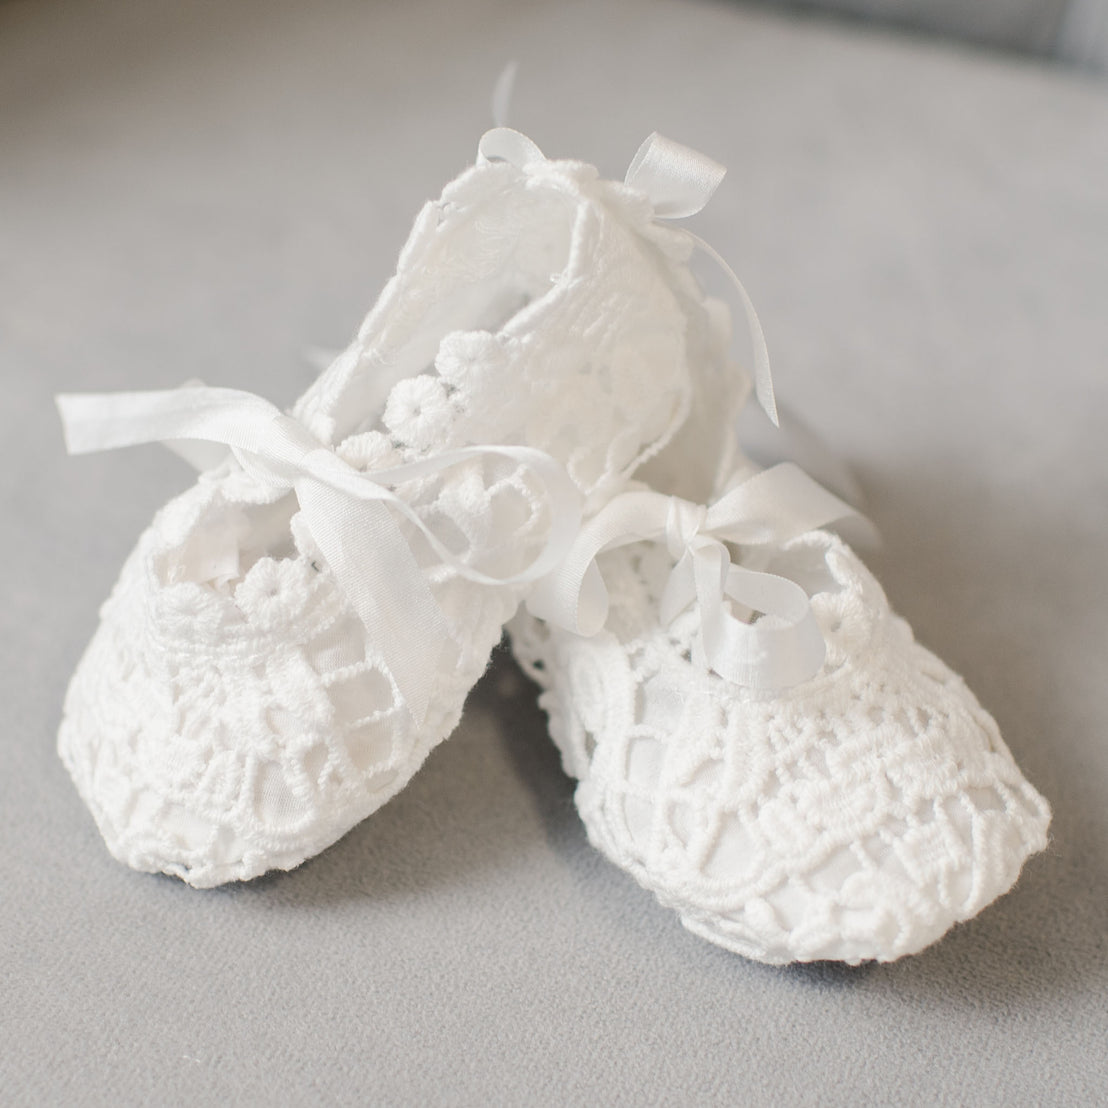 A pair of delicate white lace Grace Shoes with ribbon ties, perfect as a baptism accessory set or baby shower gift, on a soft gray background.